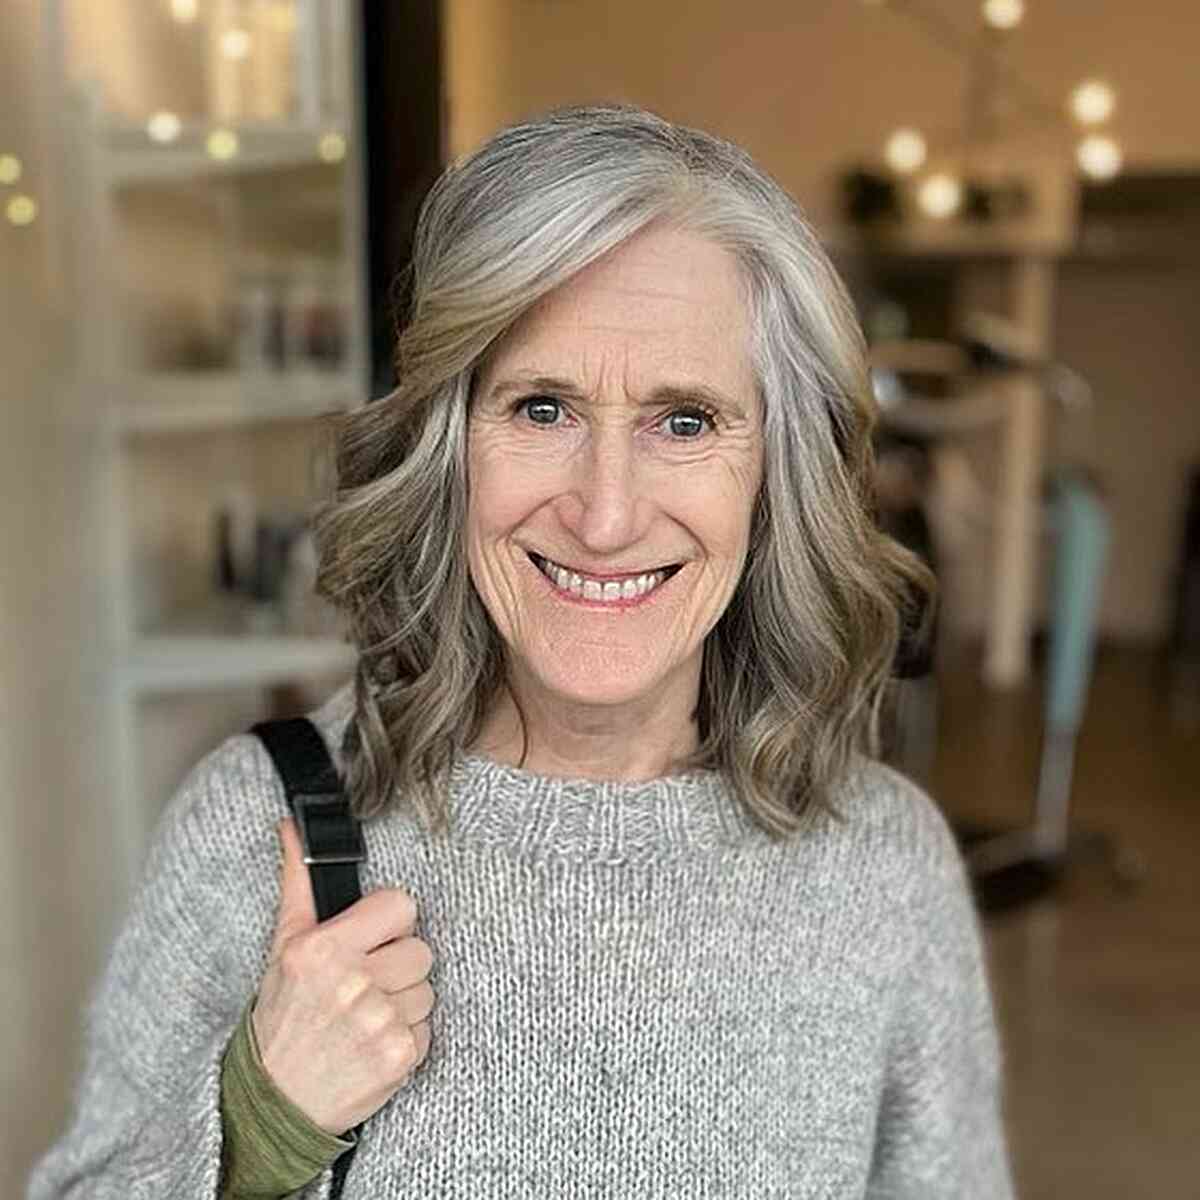 Medium Subtle Layers on Silver Thick Hair for Senior Women Over 60